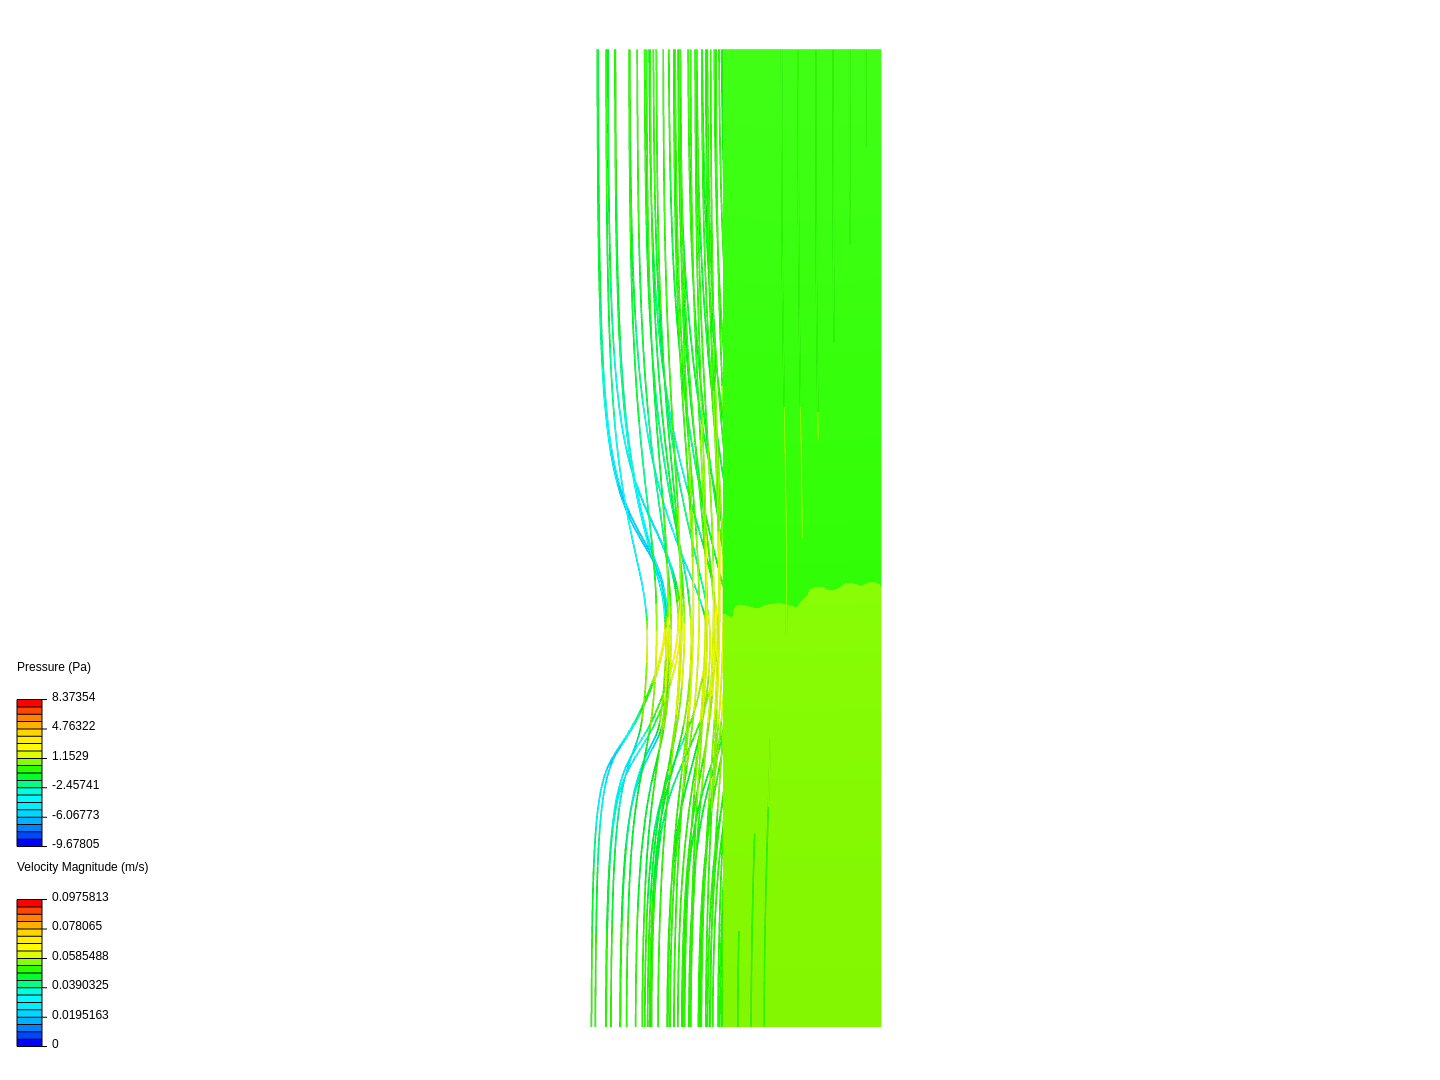 bow only cfd image